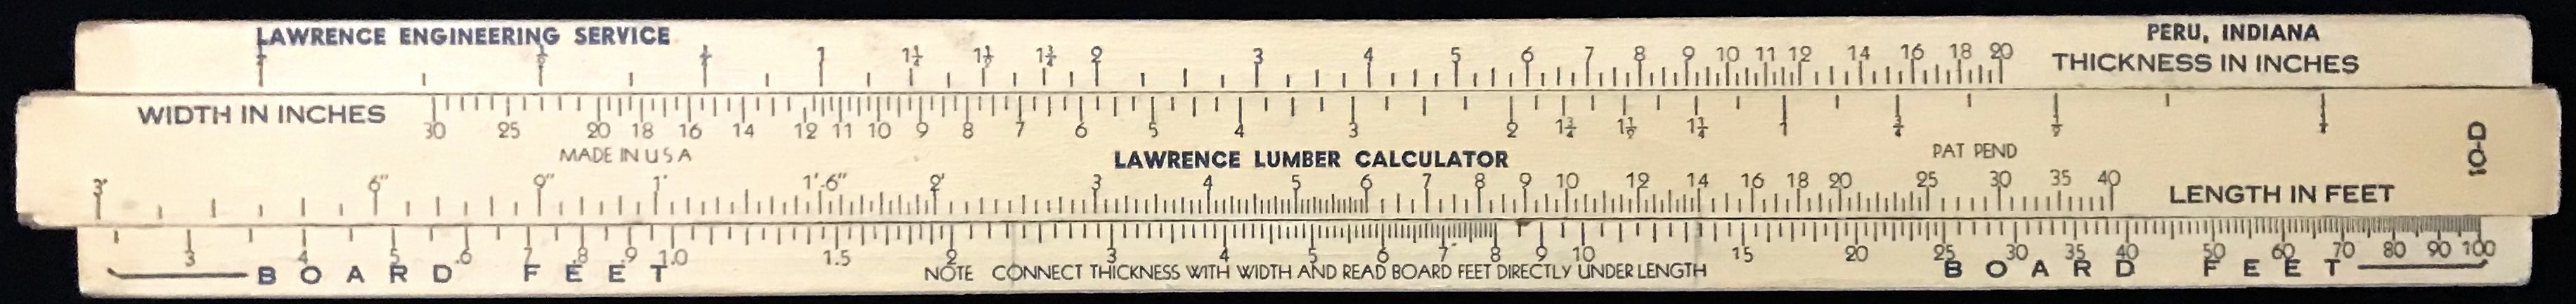 Lawrence Engineering Service, Peru, Indiana, 10-D.